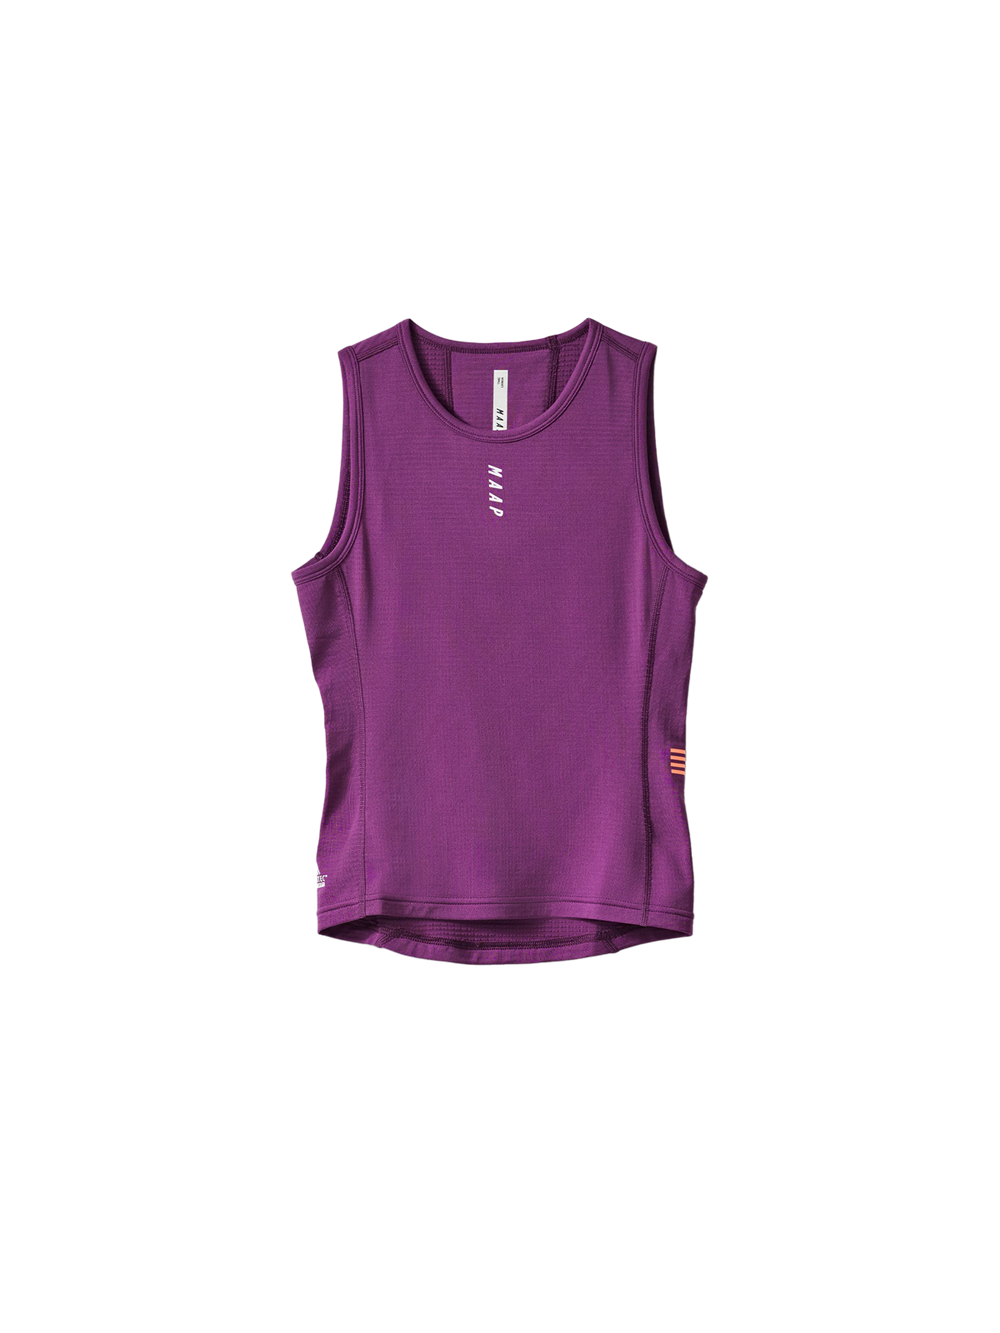 Product Image for Women's Thermal Base Layer Vest